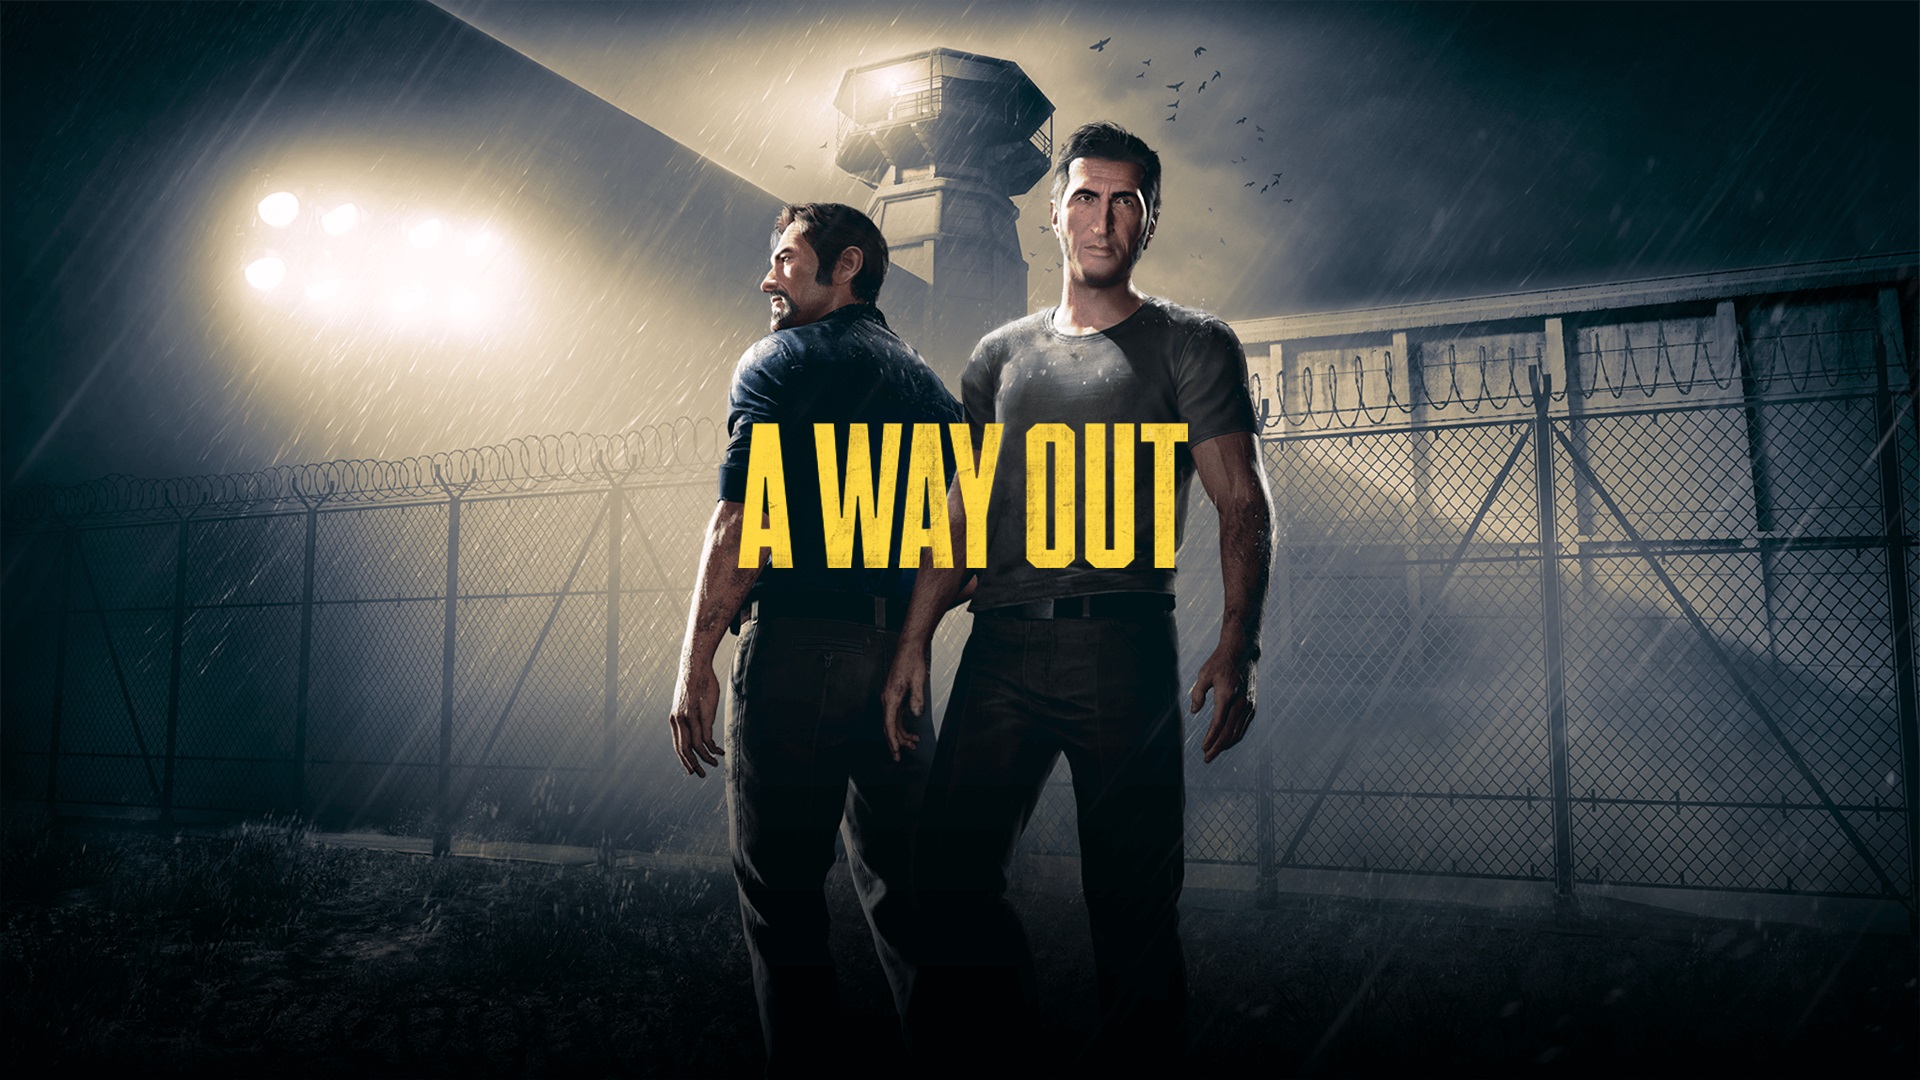 Life found a way. Way out игра. А Wаy оut игра. Побег из тюрьмы a way out. A way out обложка.